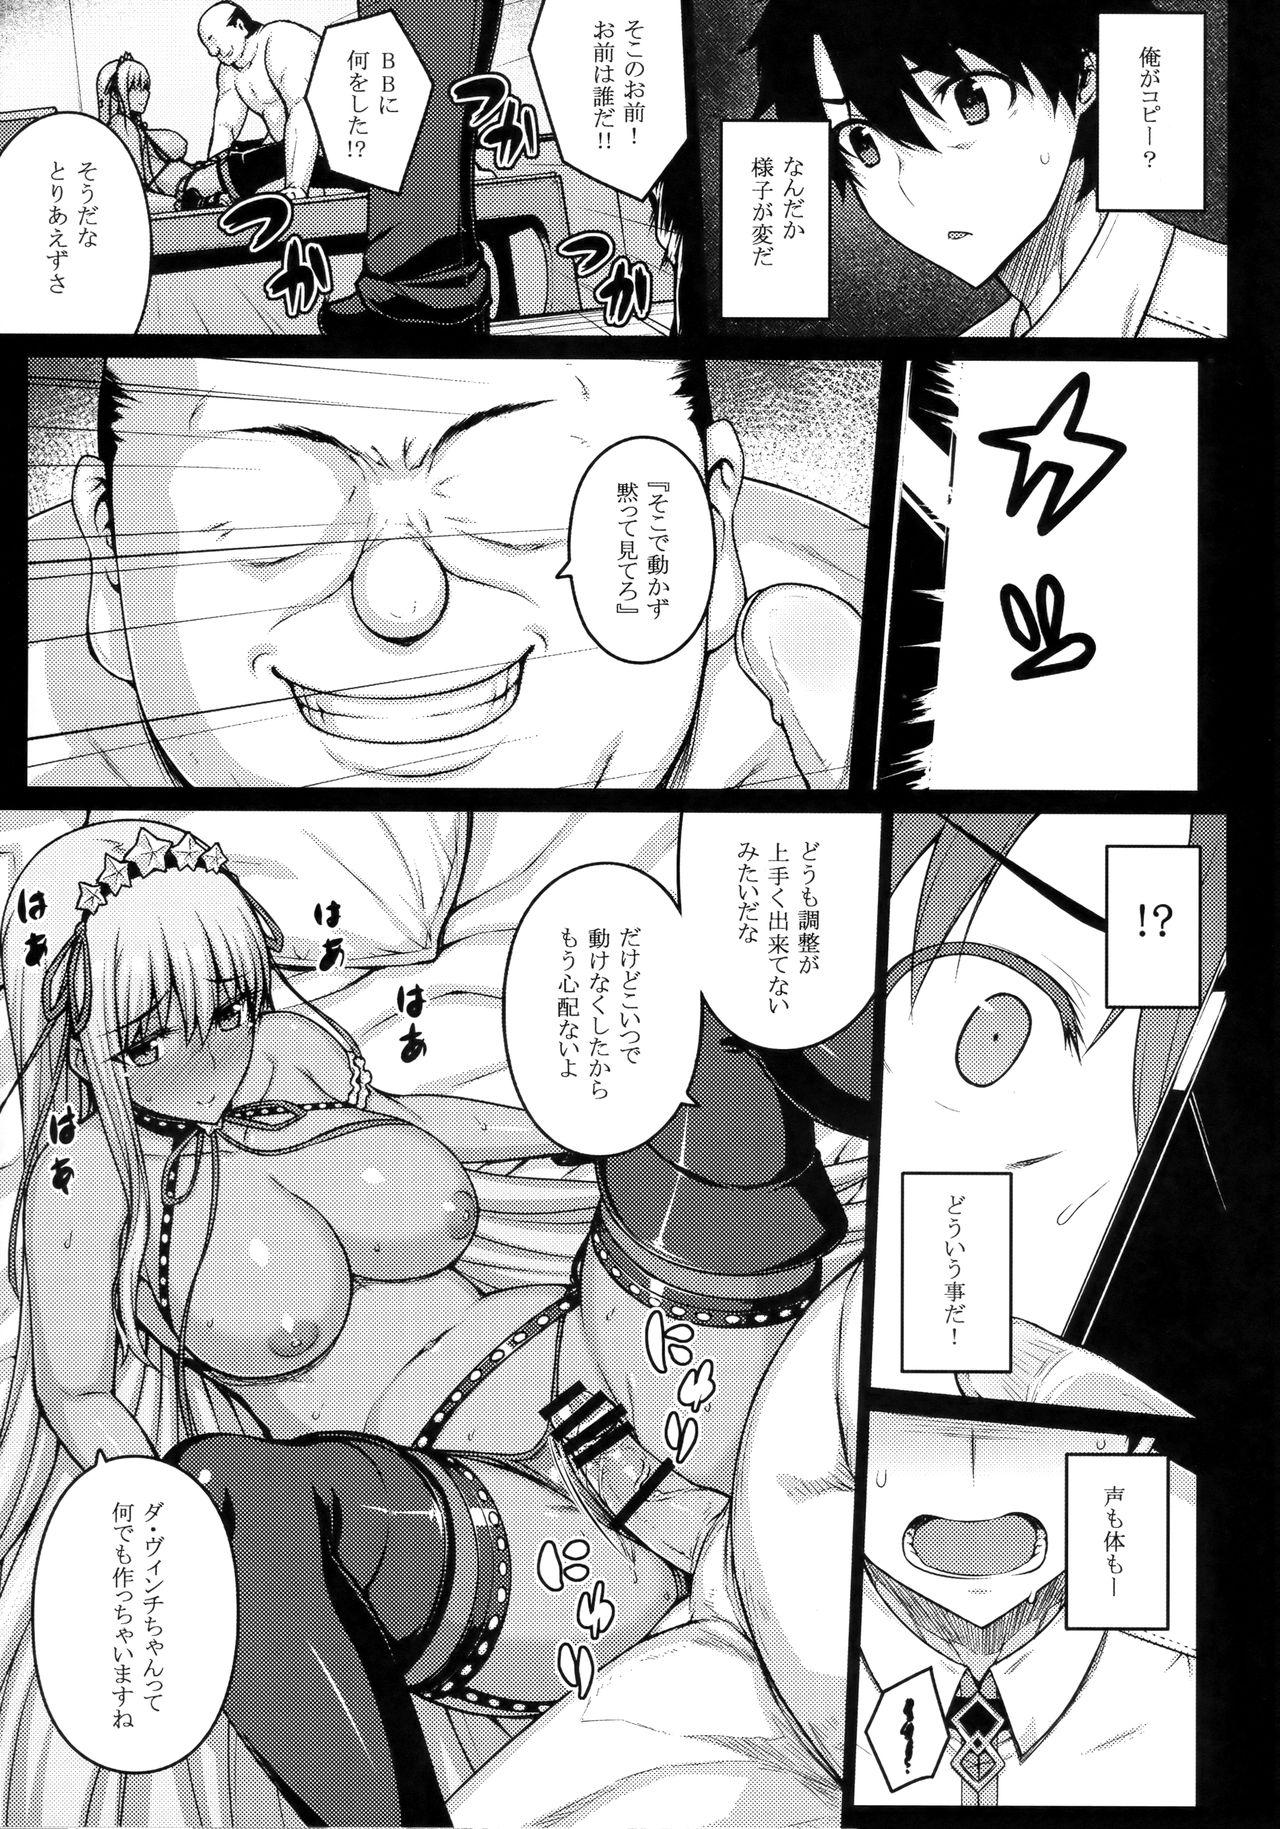 Studs 5STAR - Fate grand order Pounding - Page 8